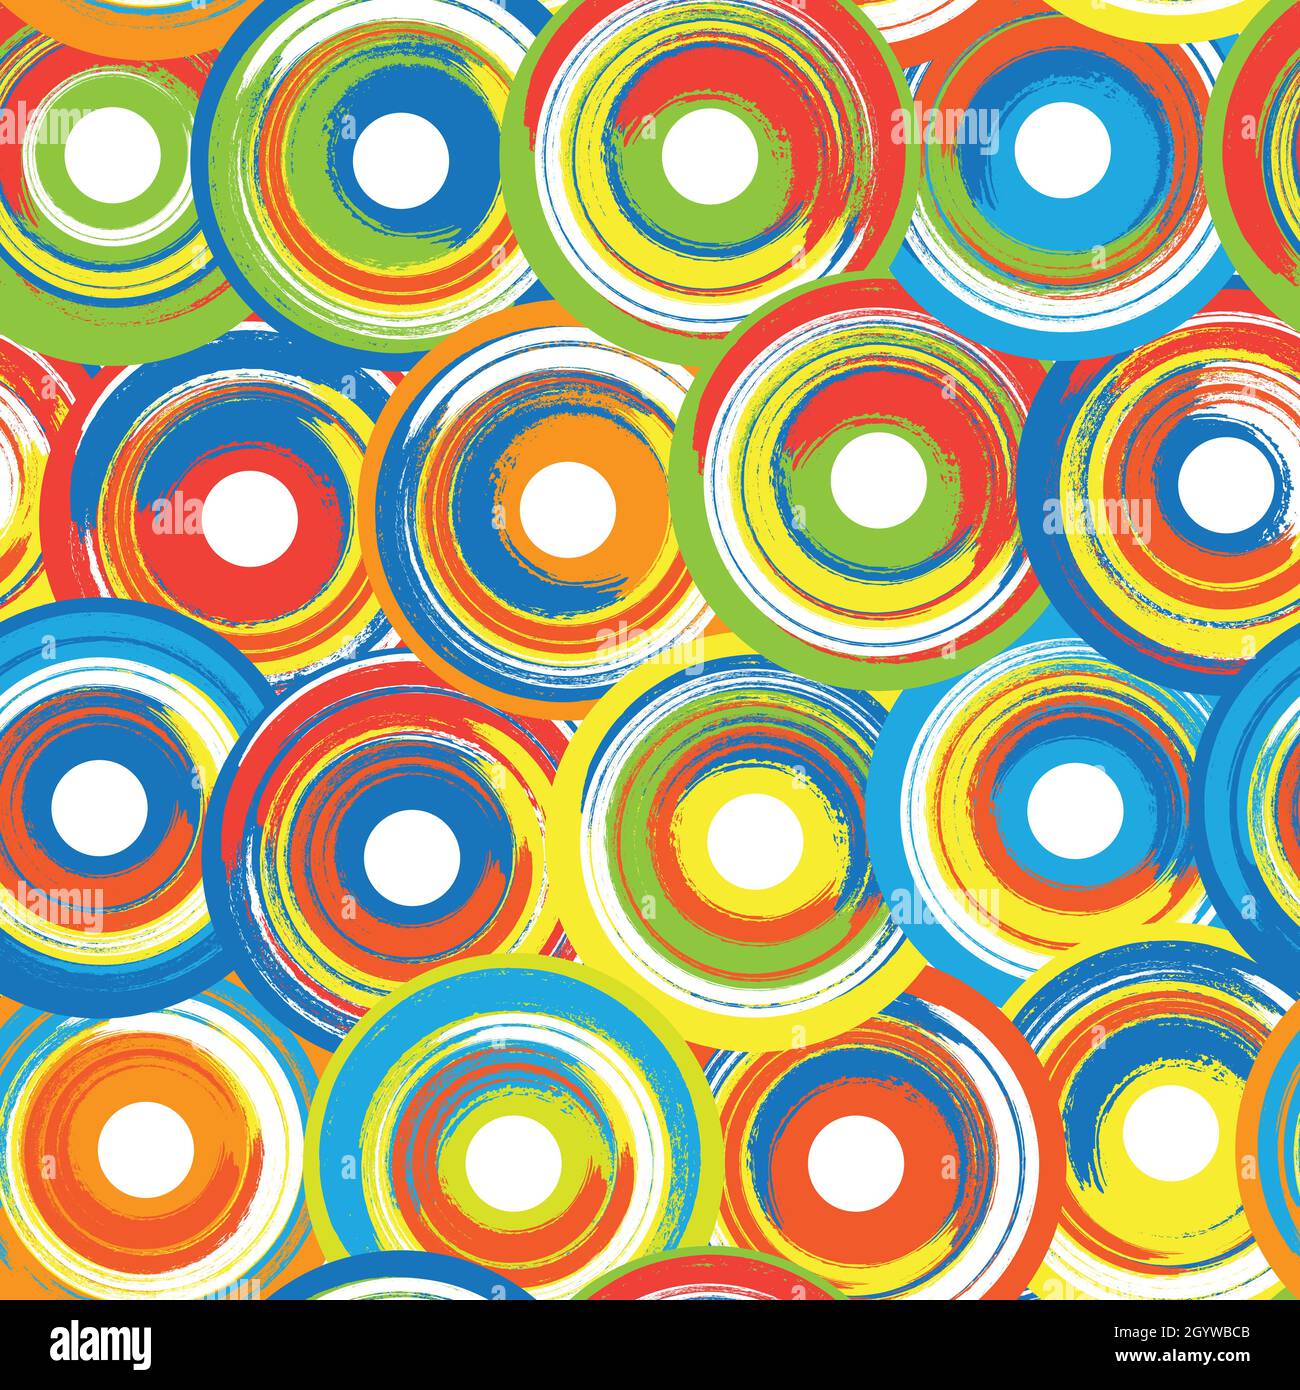 Colorful composition of overlapping circles with a painting effect. Retro-style. 70's taste. Seamless repeating pattern. Vector illustration. Stock Vector